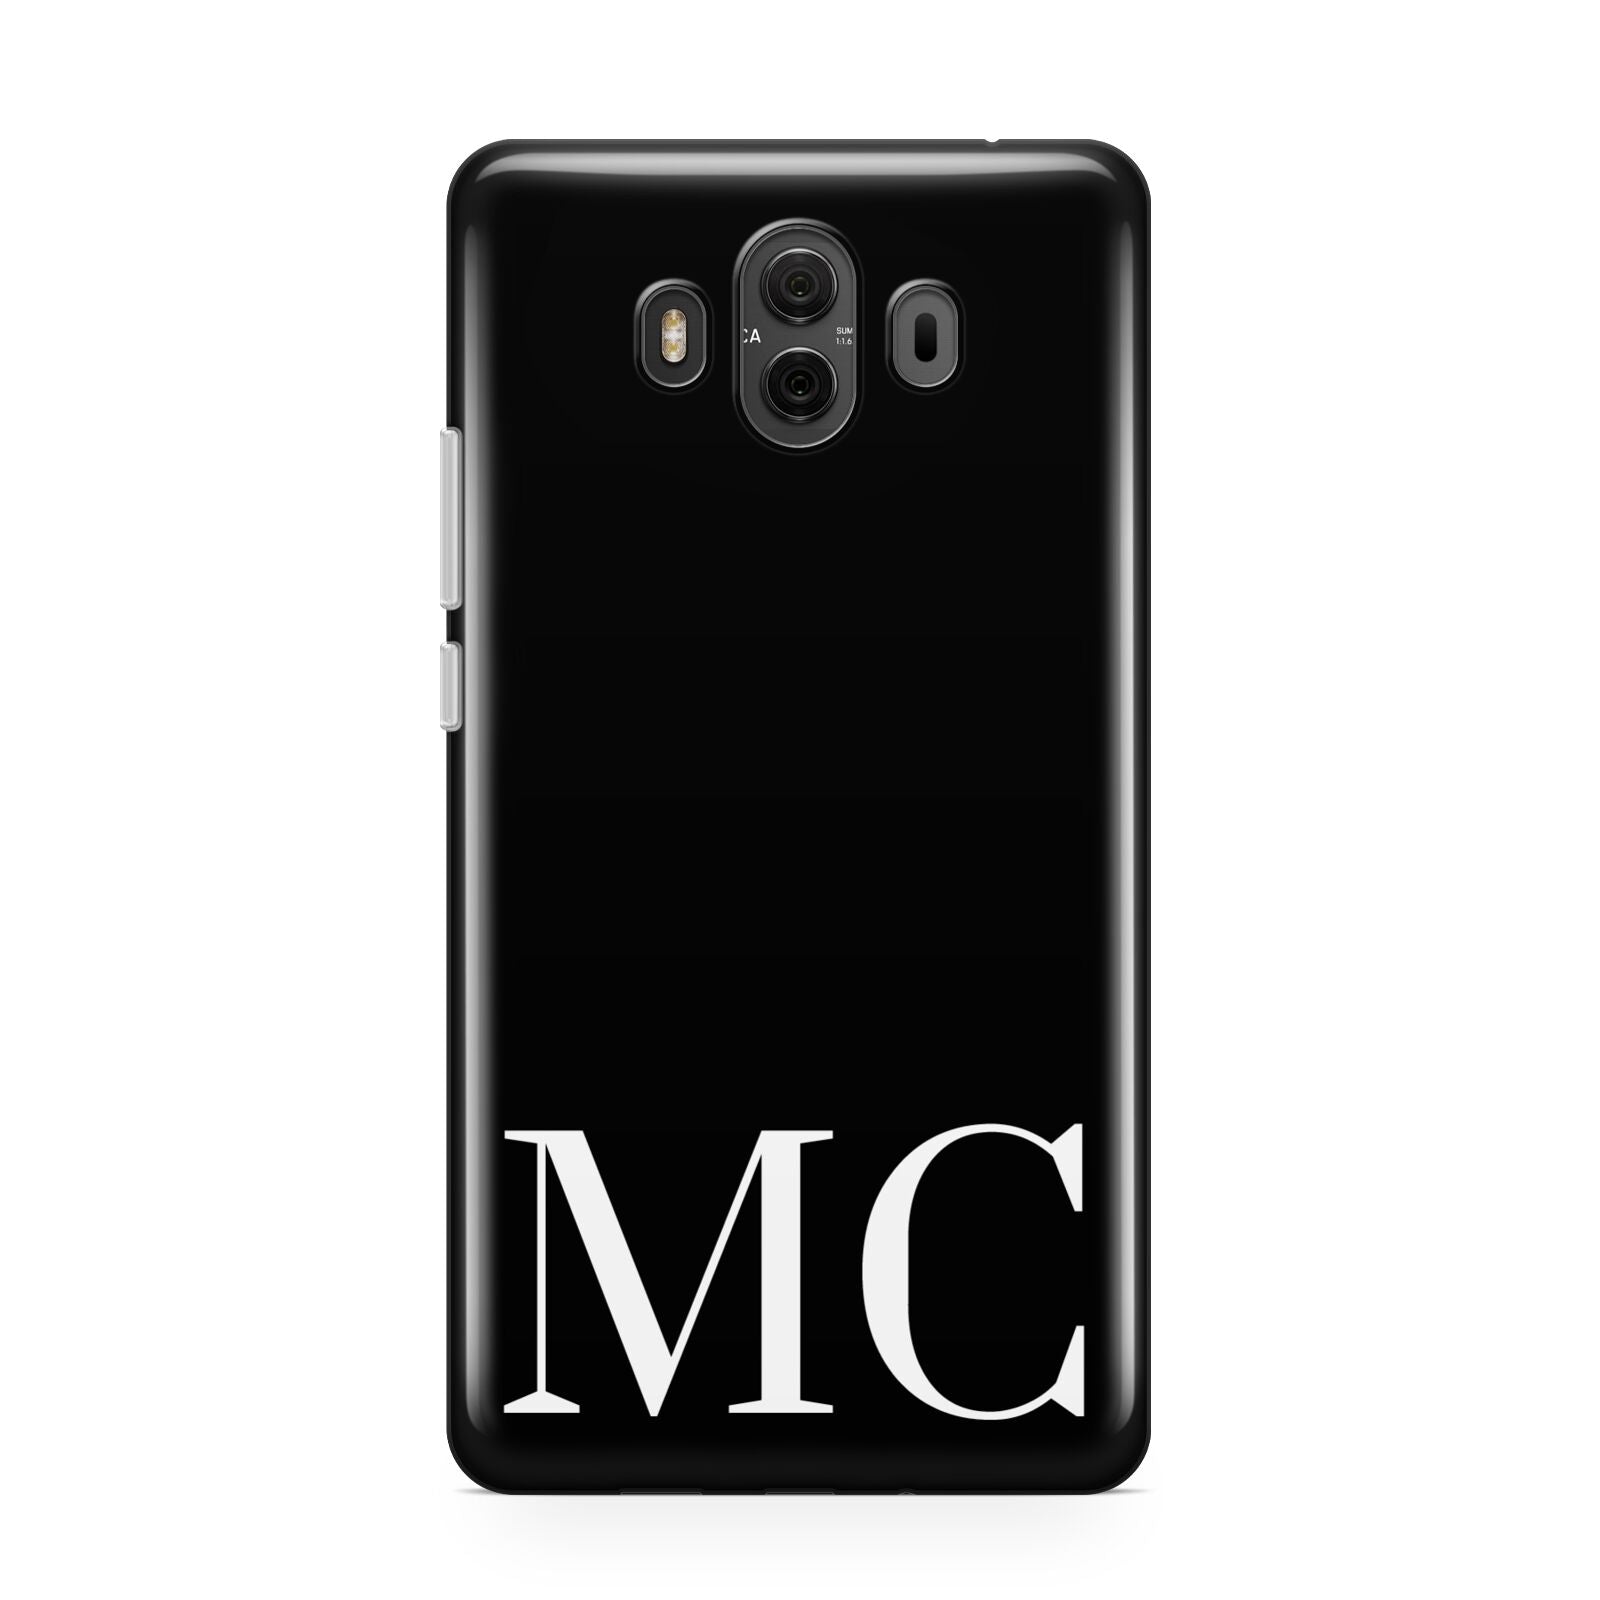 Initials Personalised 1 Huawei Mate 10 Protective Phone Case